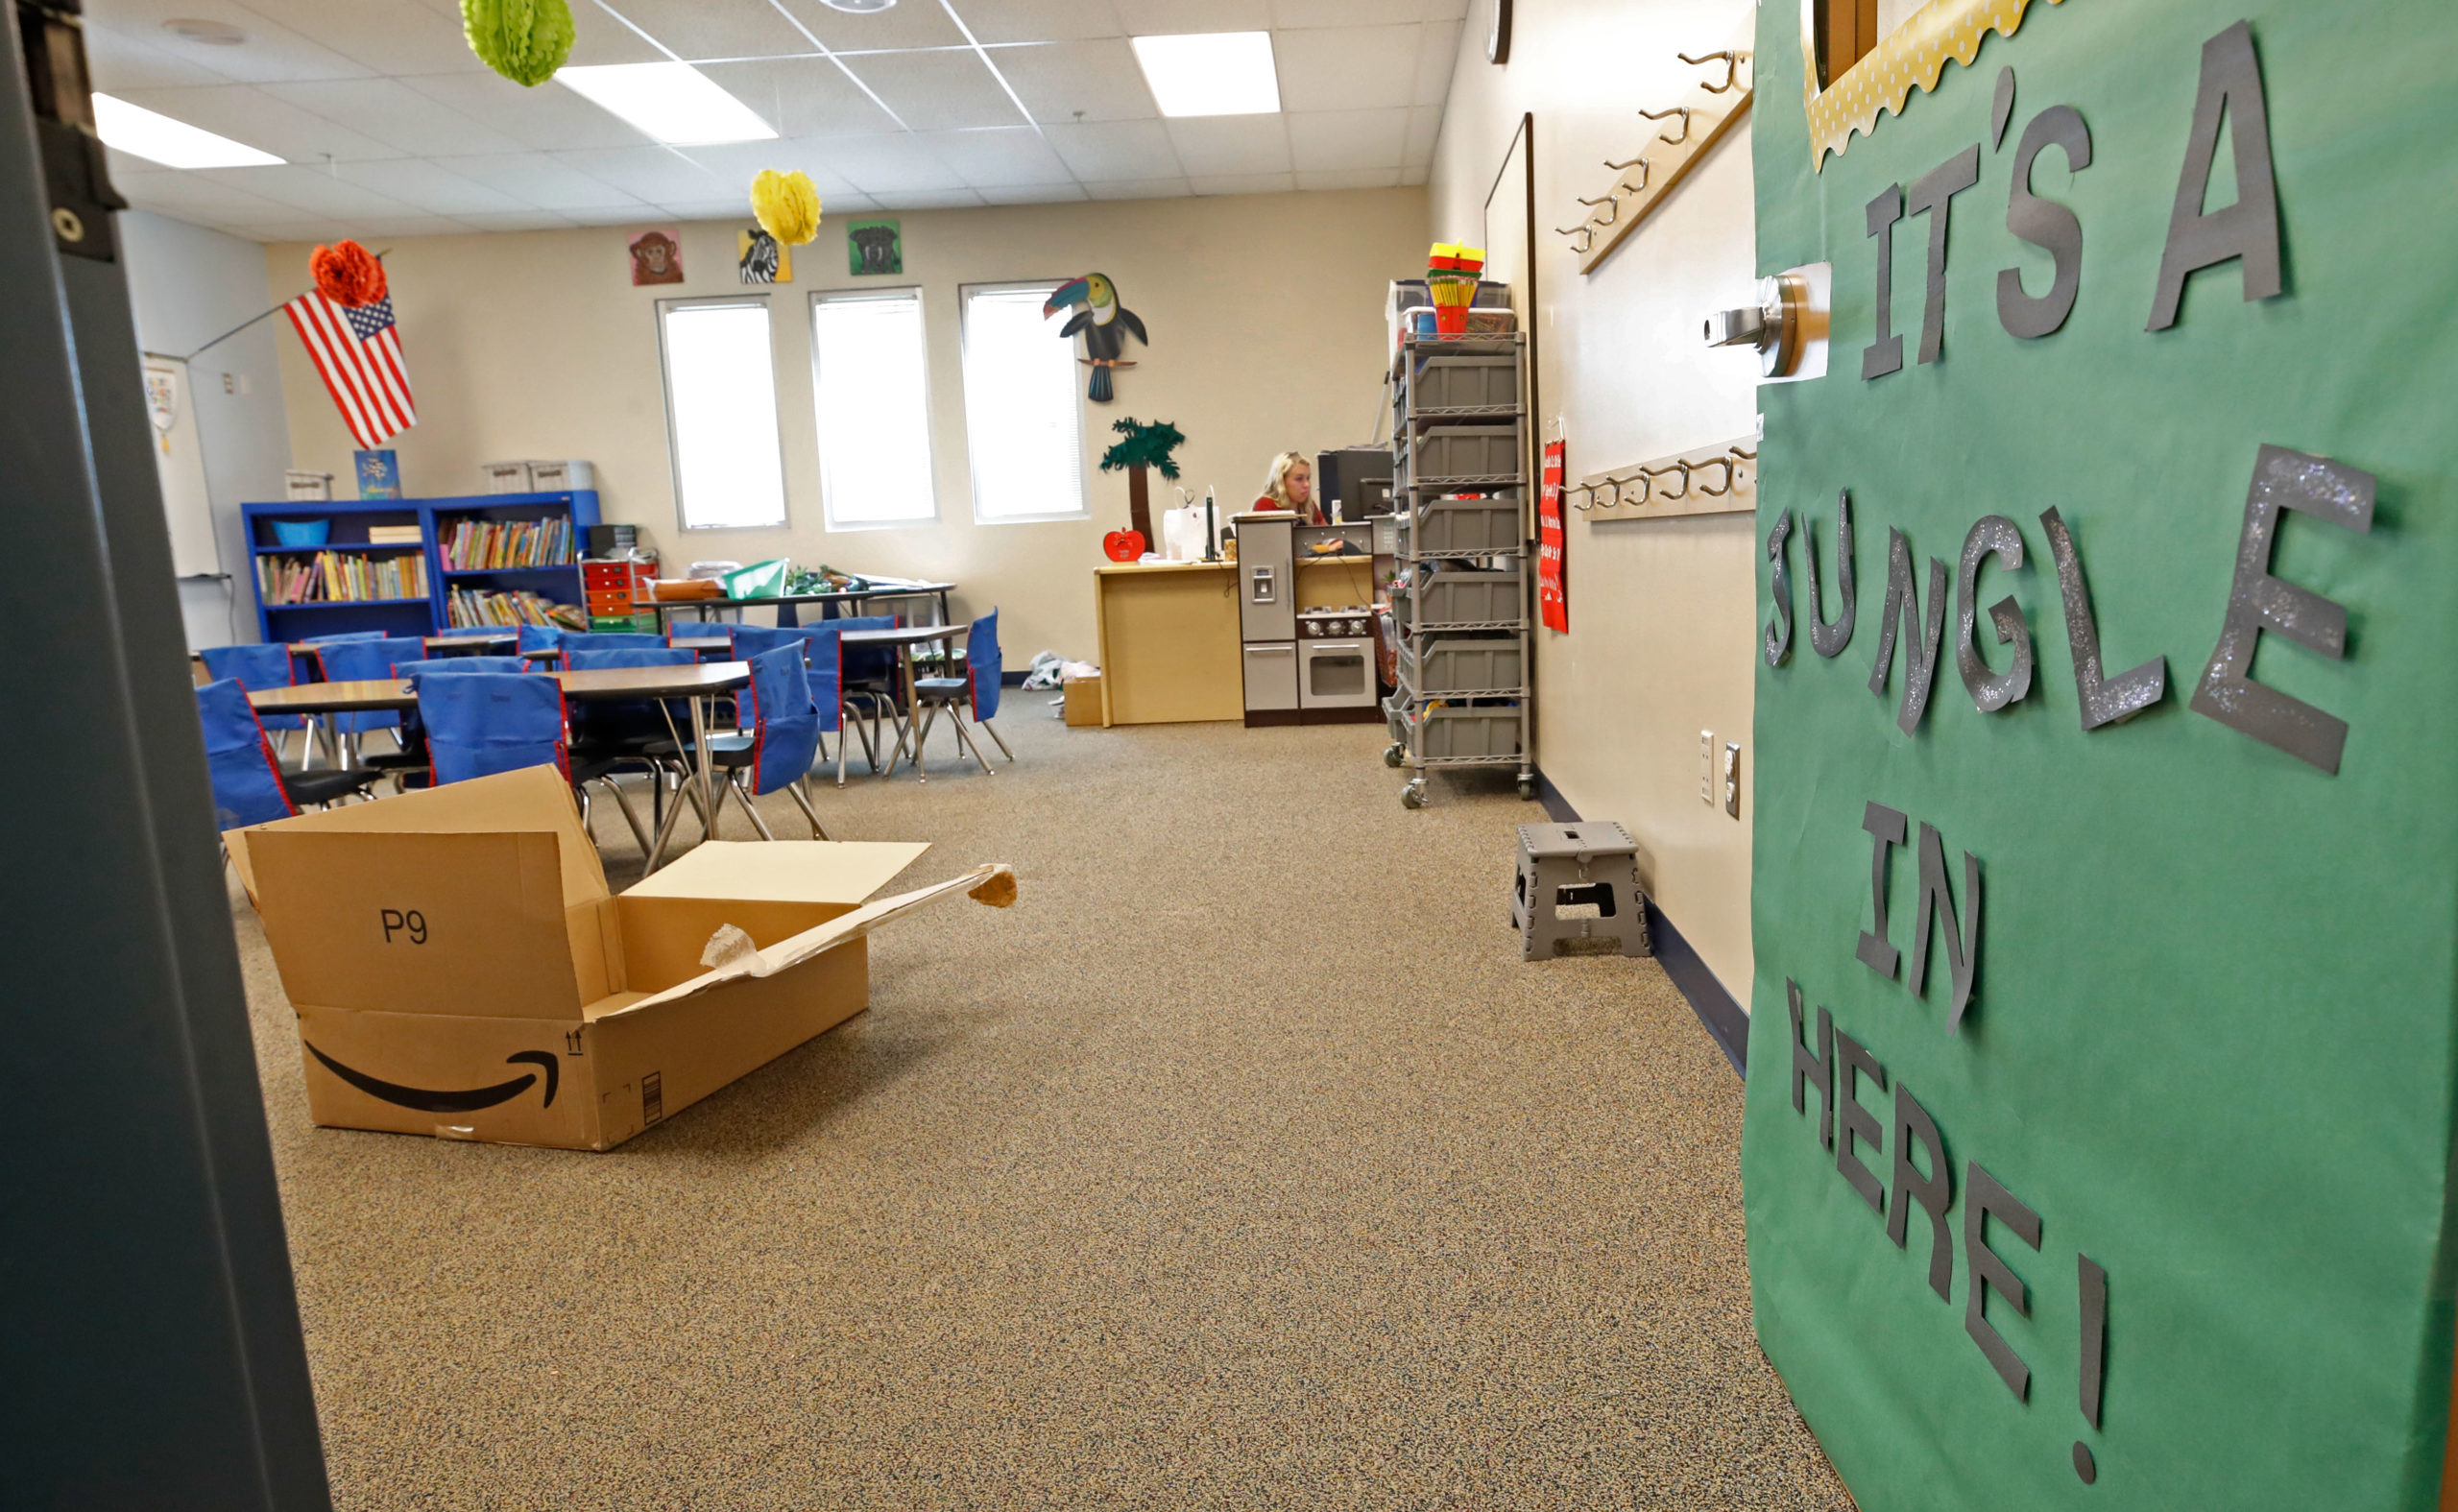 A teacher sets up her classroom at Freedom Preparatory Academy as they begin to prepare to restart school after it was closed in March due to COVID-19 on August 13, 2020 in Provo, Utah. The school is planning to have students return on August 18 for five days a week instruction, but with reduced hours during the day. (Photo by George Frey/Getty Images)